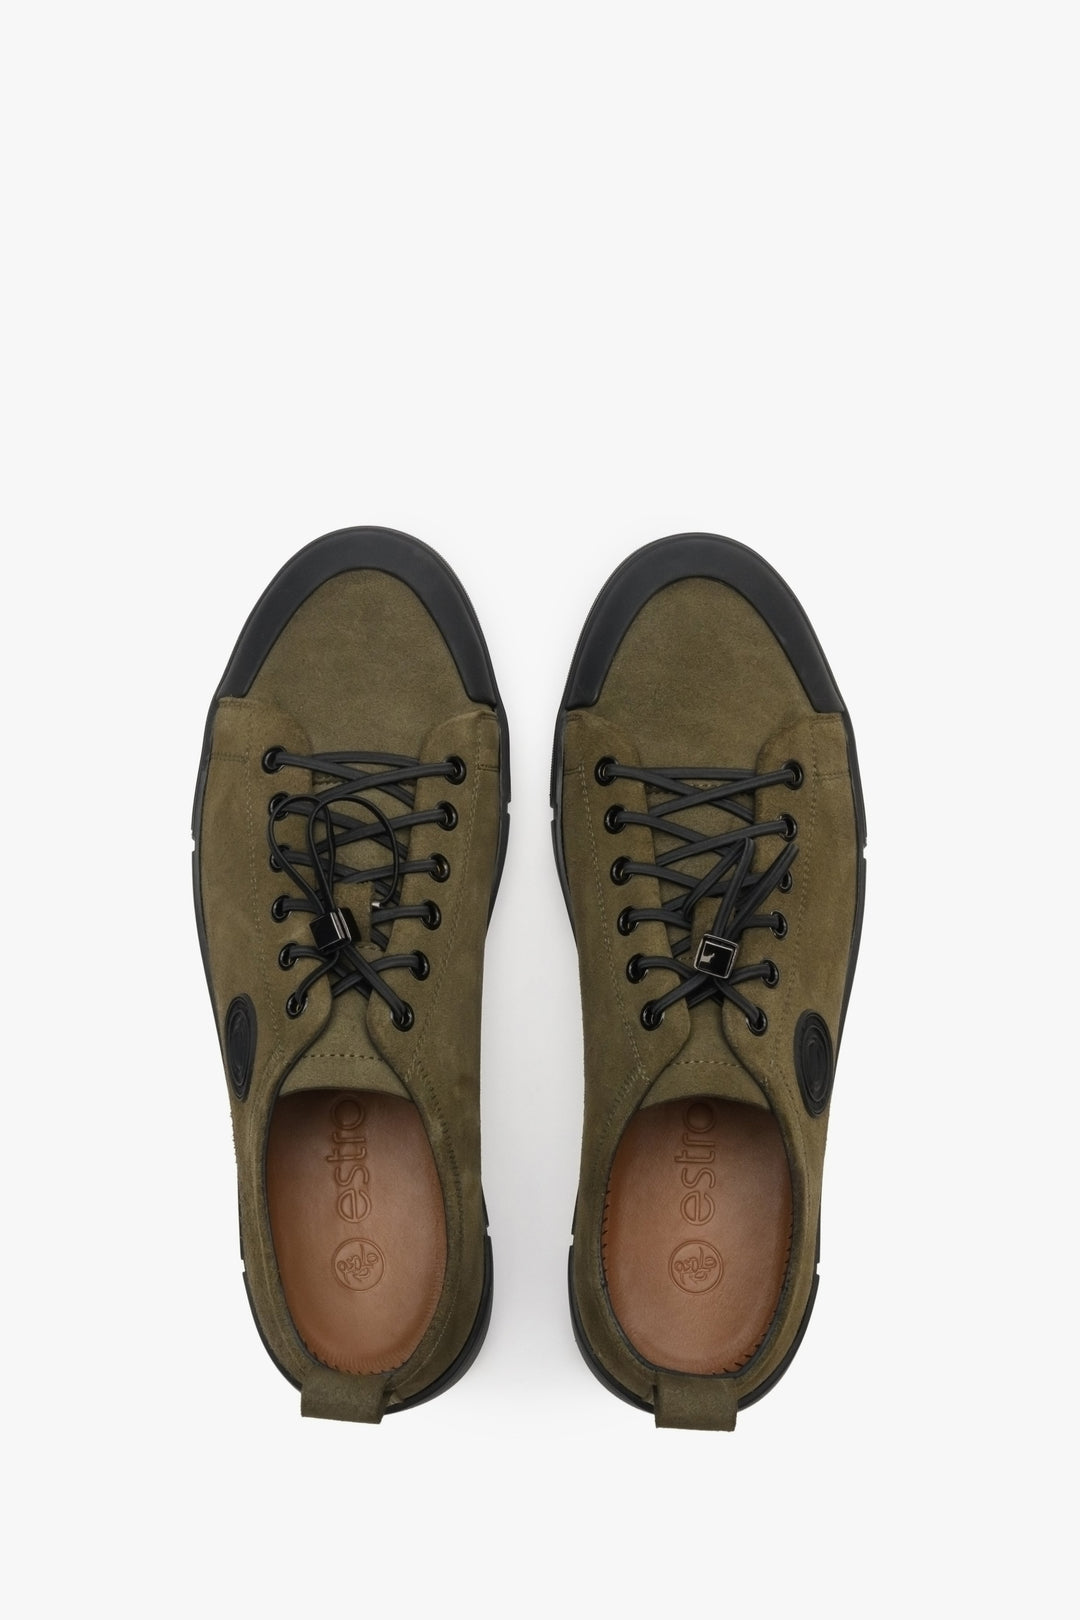 Men's Estro sneakers in green made of genuine leather - top view presentation of the footwear.